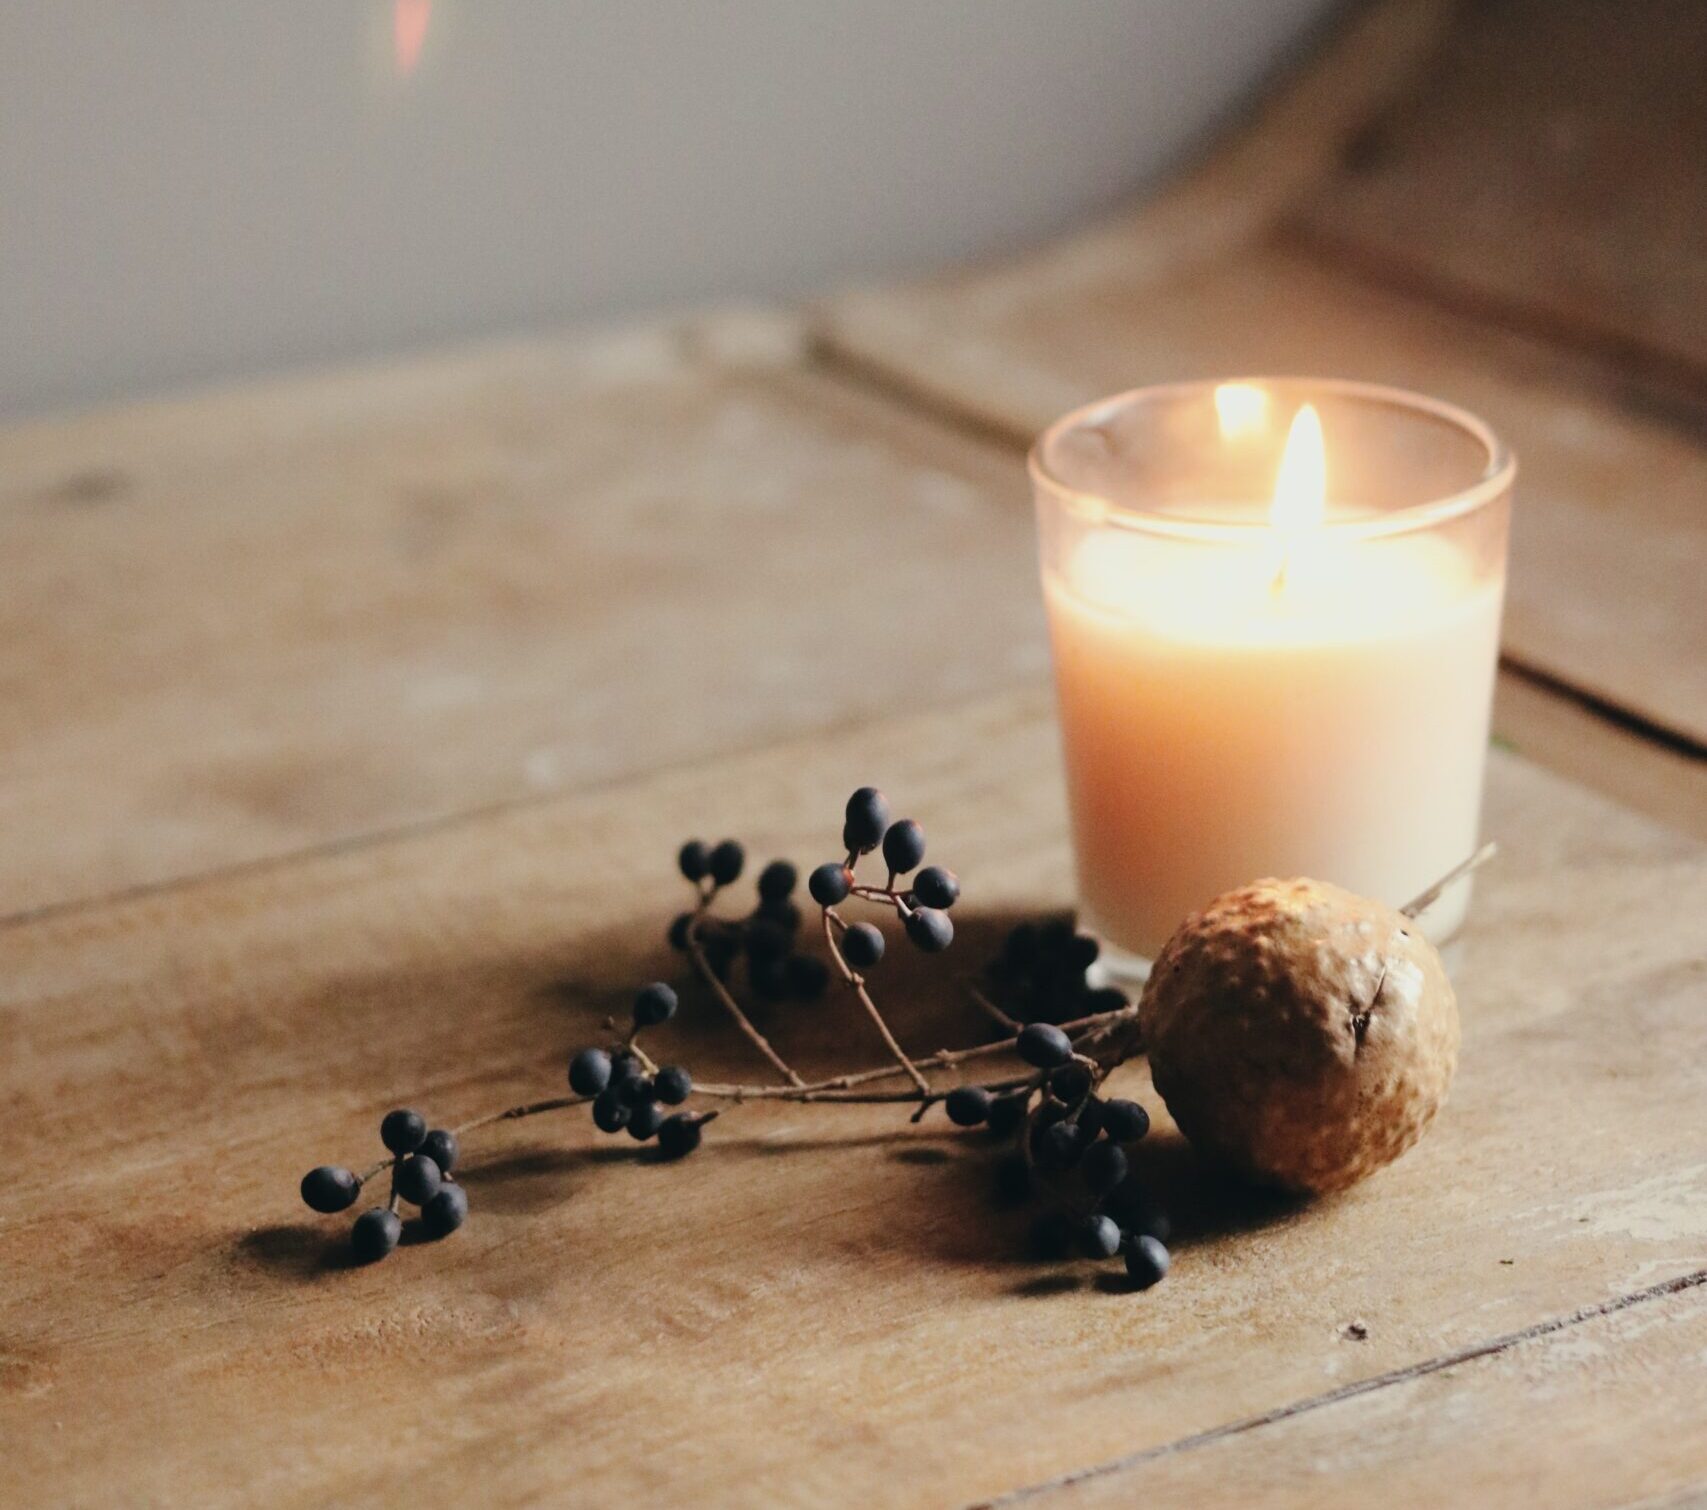 Candle on wooden table